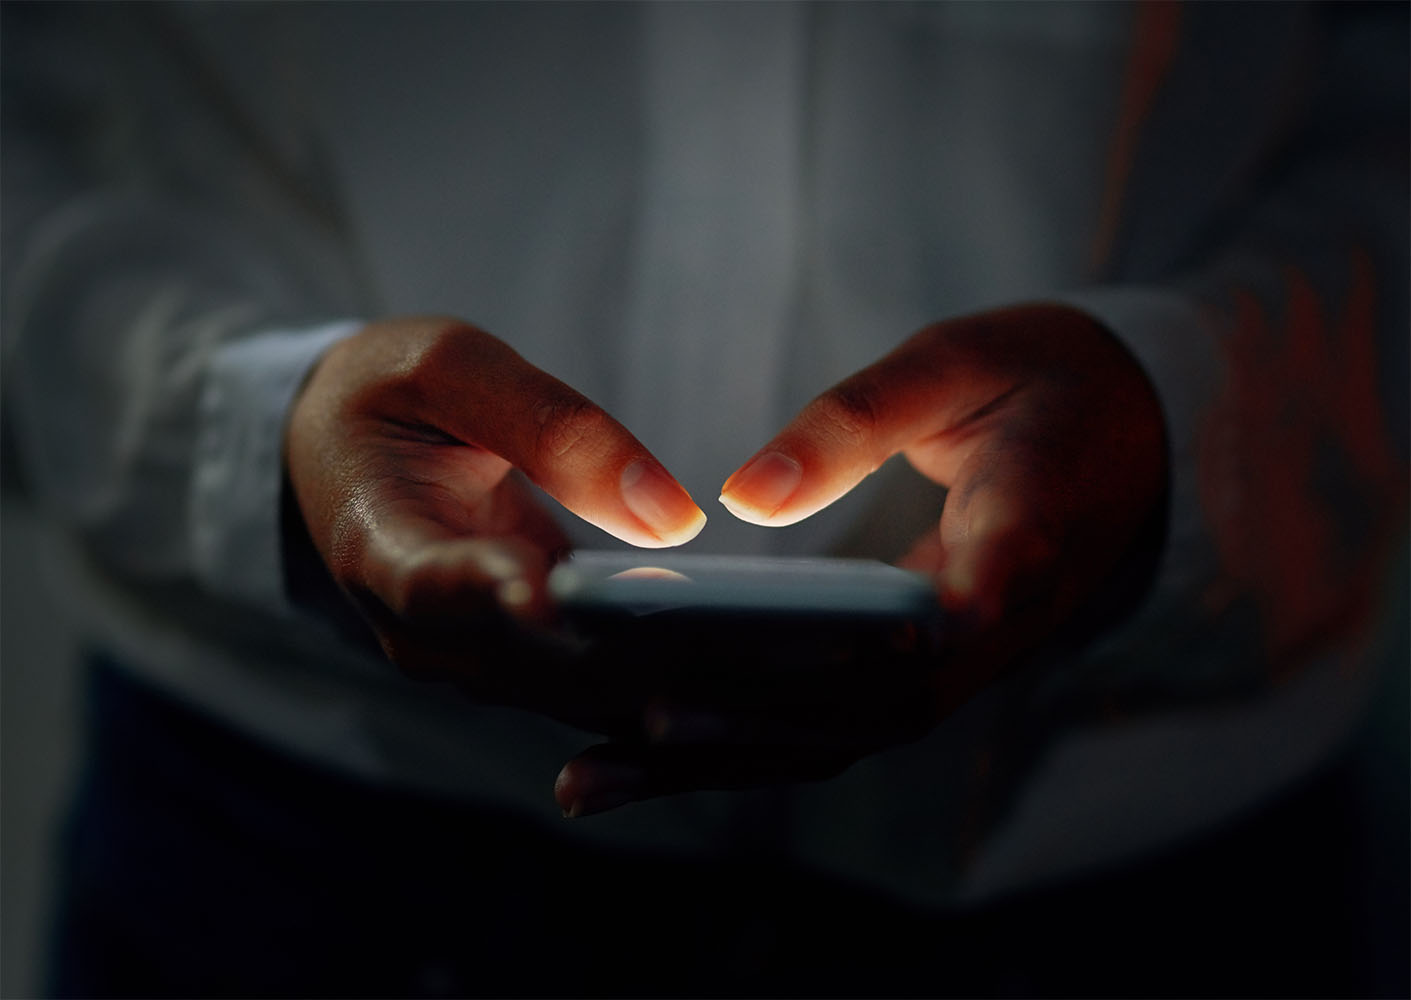 Person holding a smartphone, dark background, phone lit up